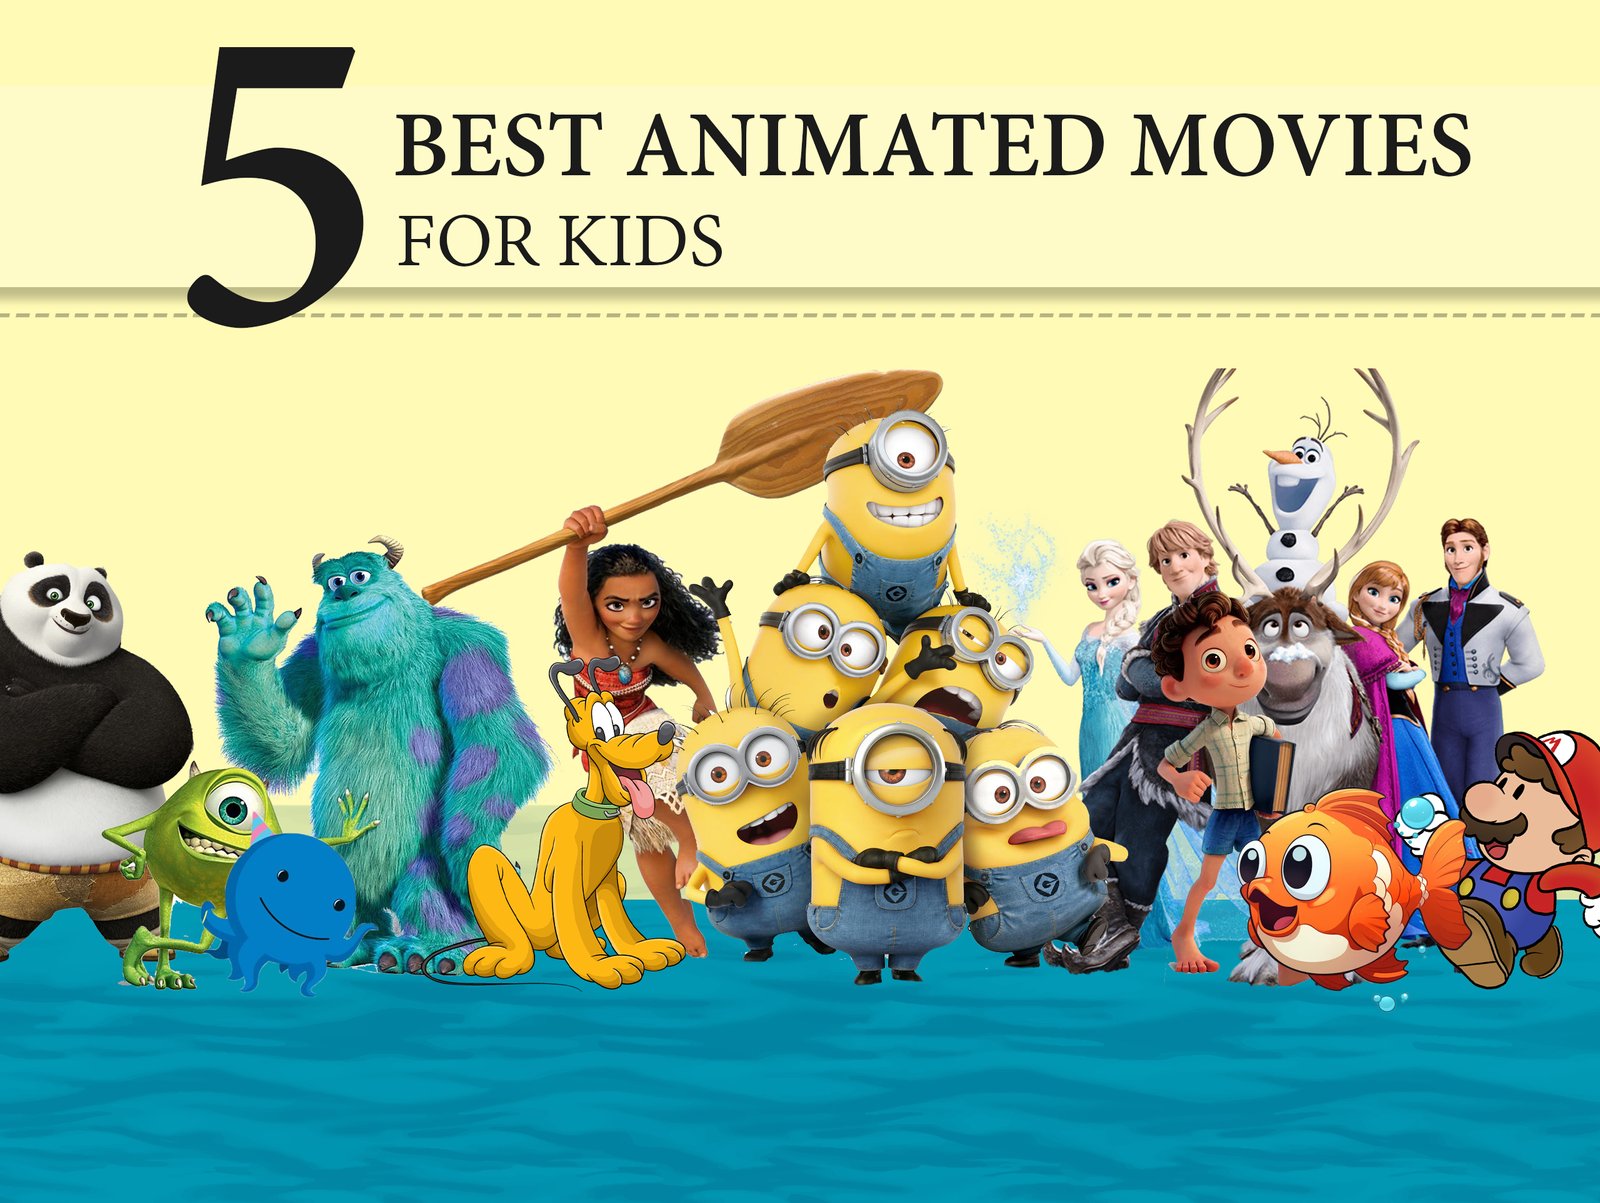 Best animated movies for kids poster